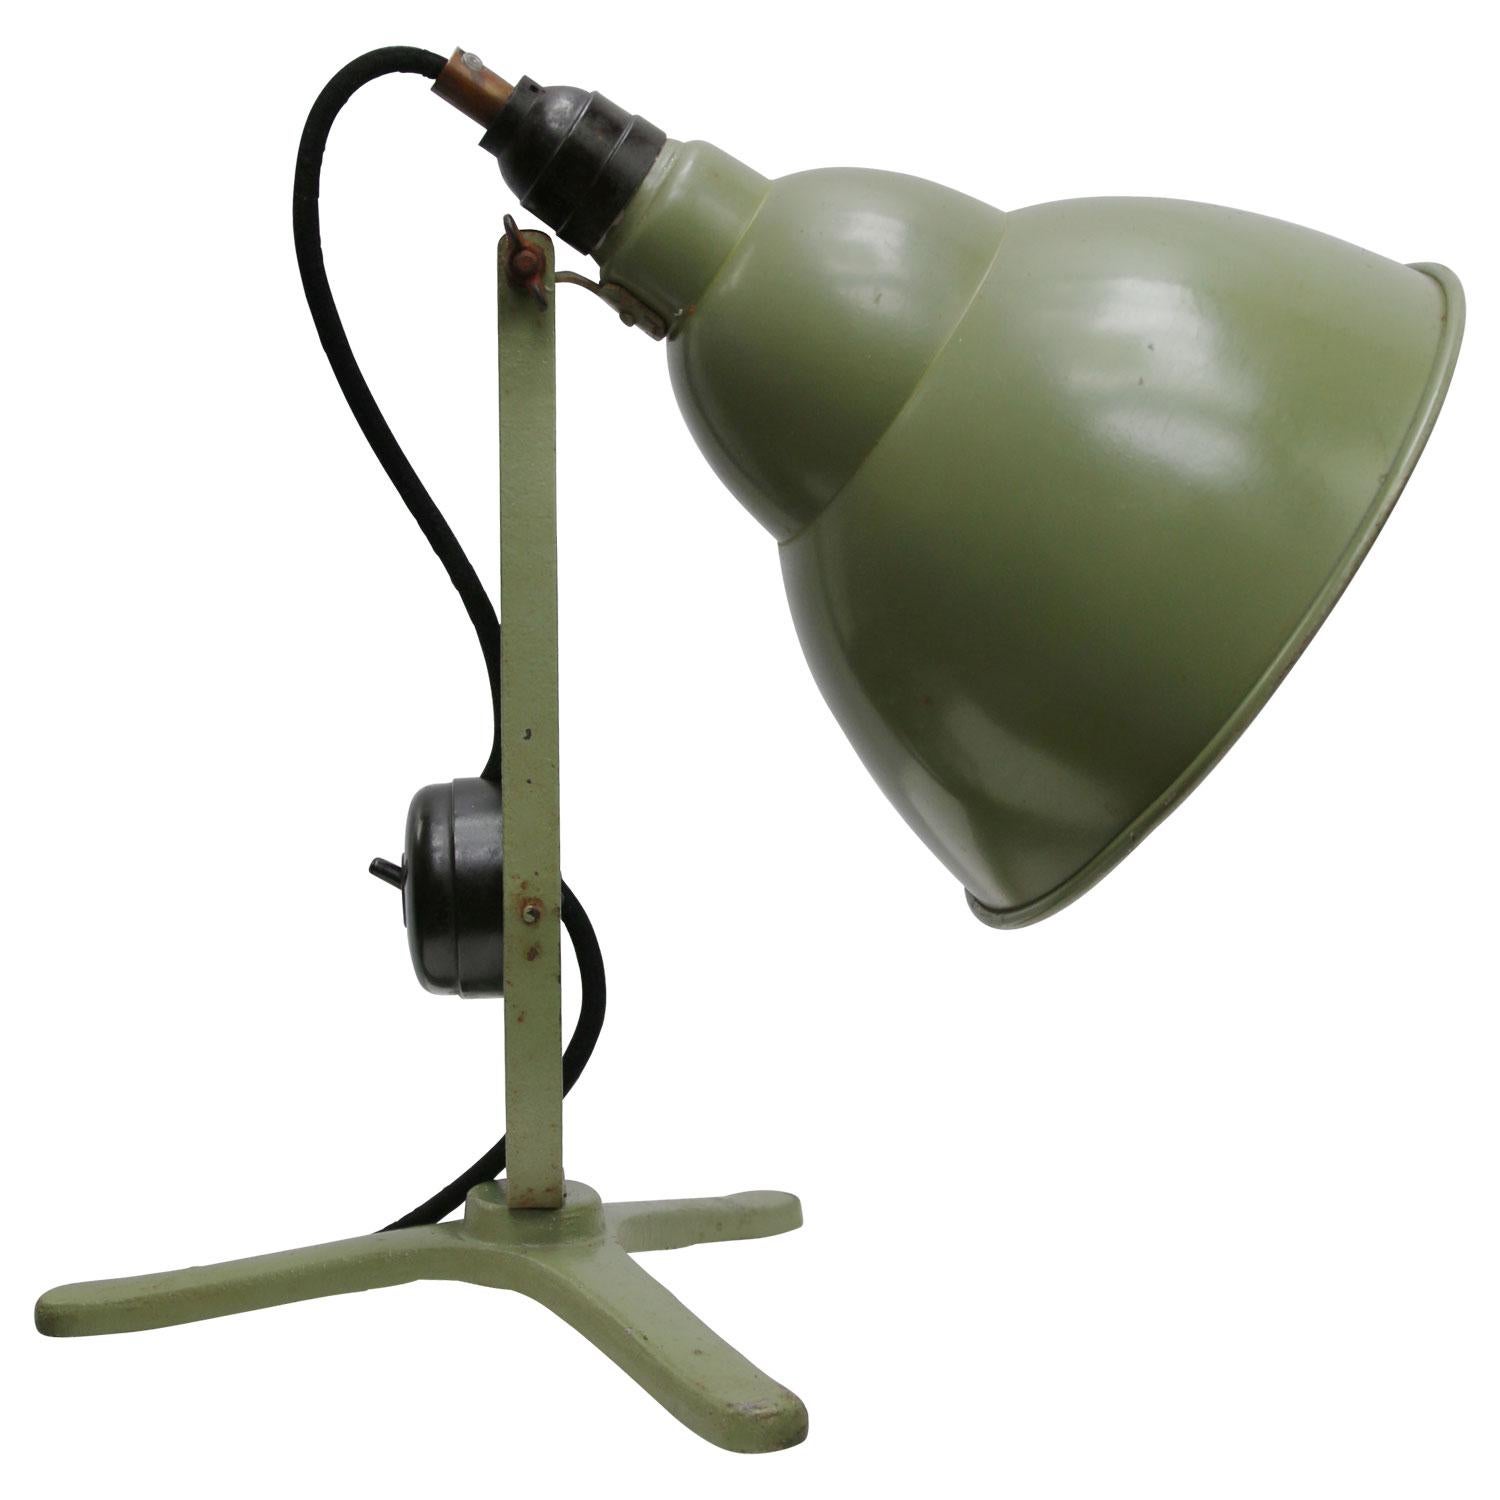 Green metal desk light.
2 meter black cotton flex, plug and switch in base

Weight: 1.00 kg / 2.2 lb

Priced per individual item. All lamps have been made suitable by international standards for incandescent light bulbs, energy-efficient and